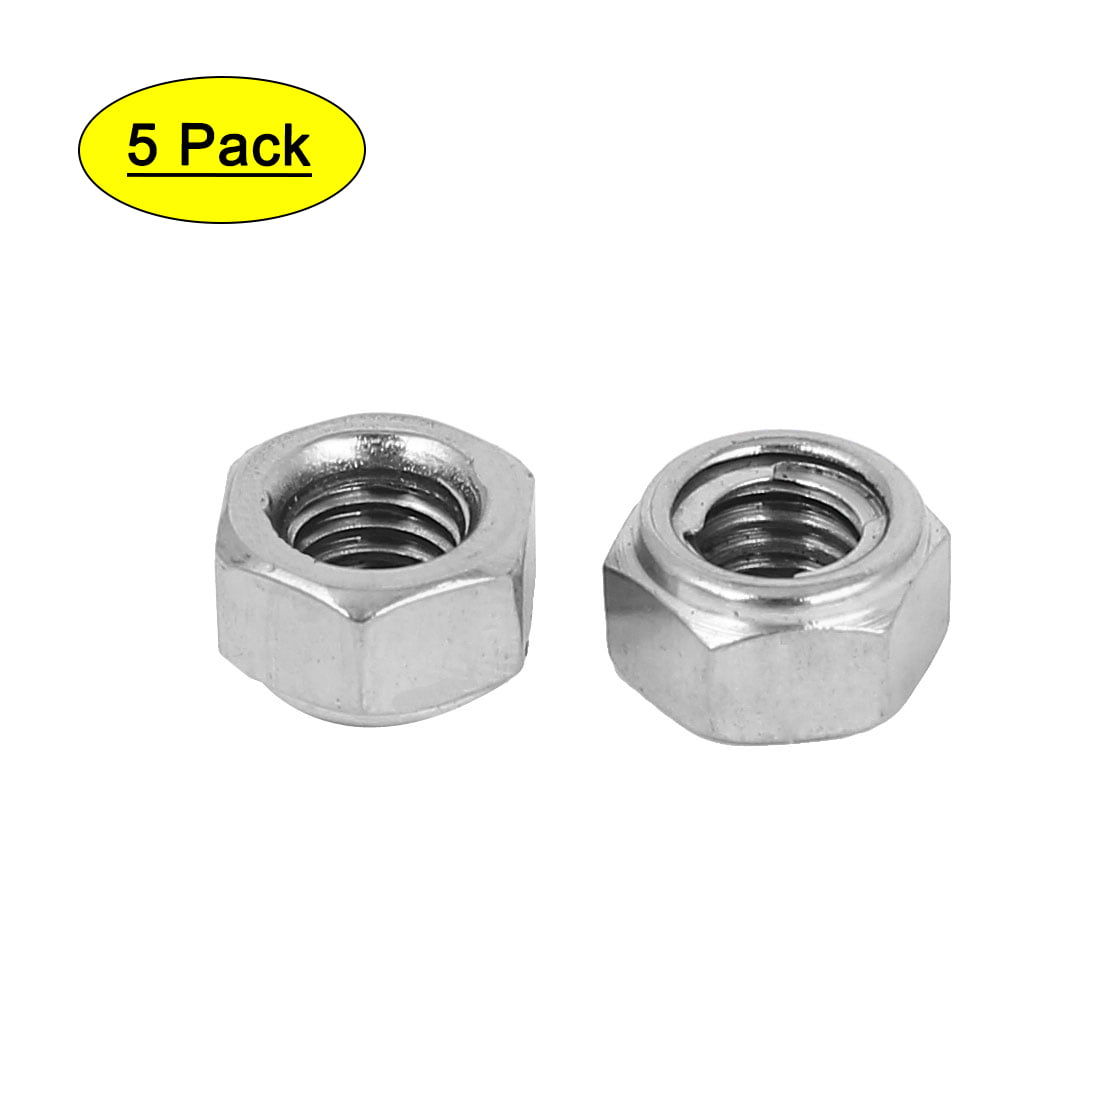 A2 Stainless Steel Qty 25 Nylon Insert Hex Lock Nut DIN 985 M5-0.8 / 5mm 